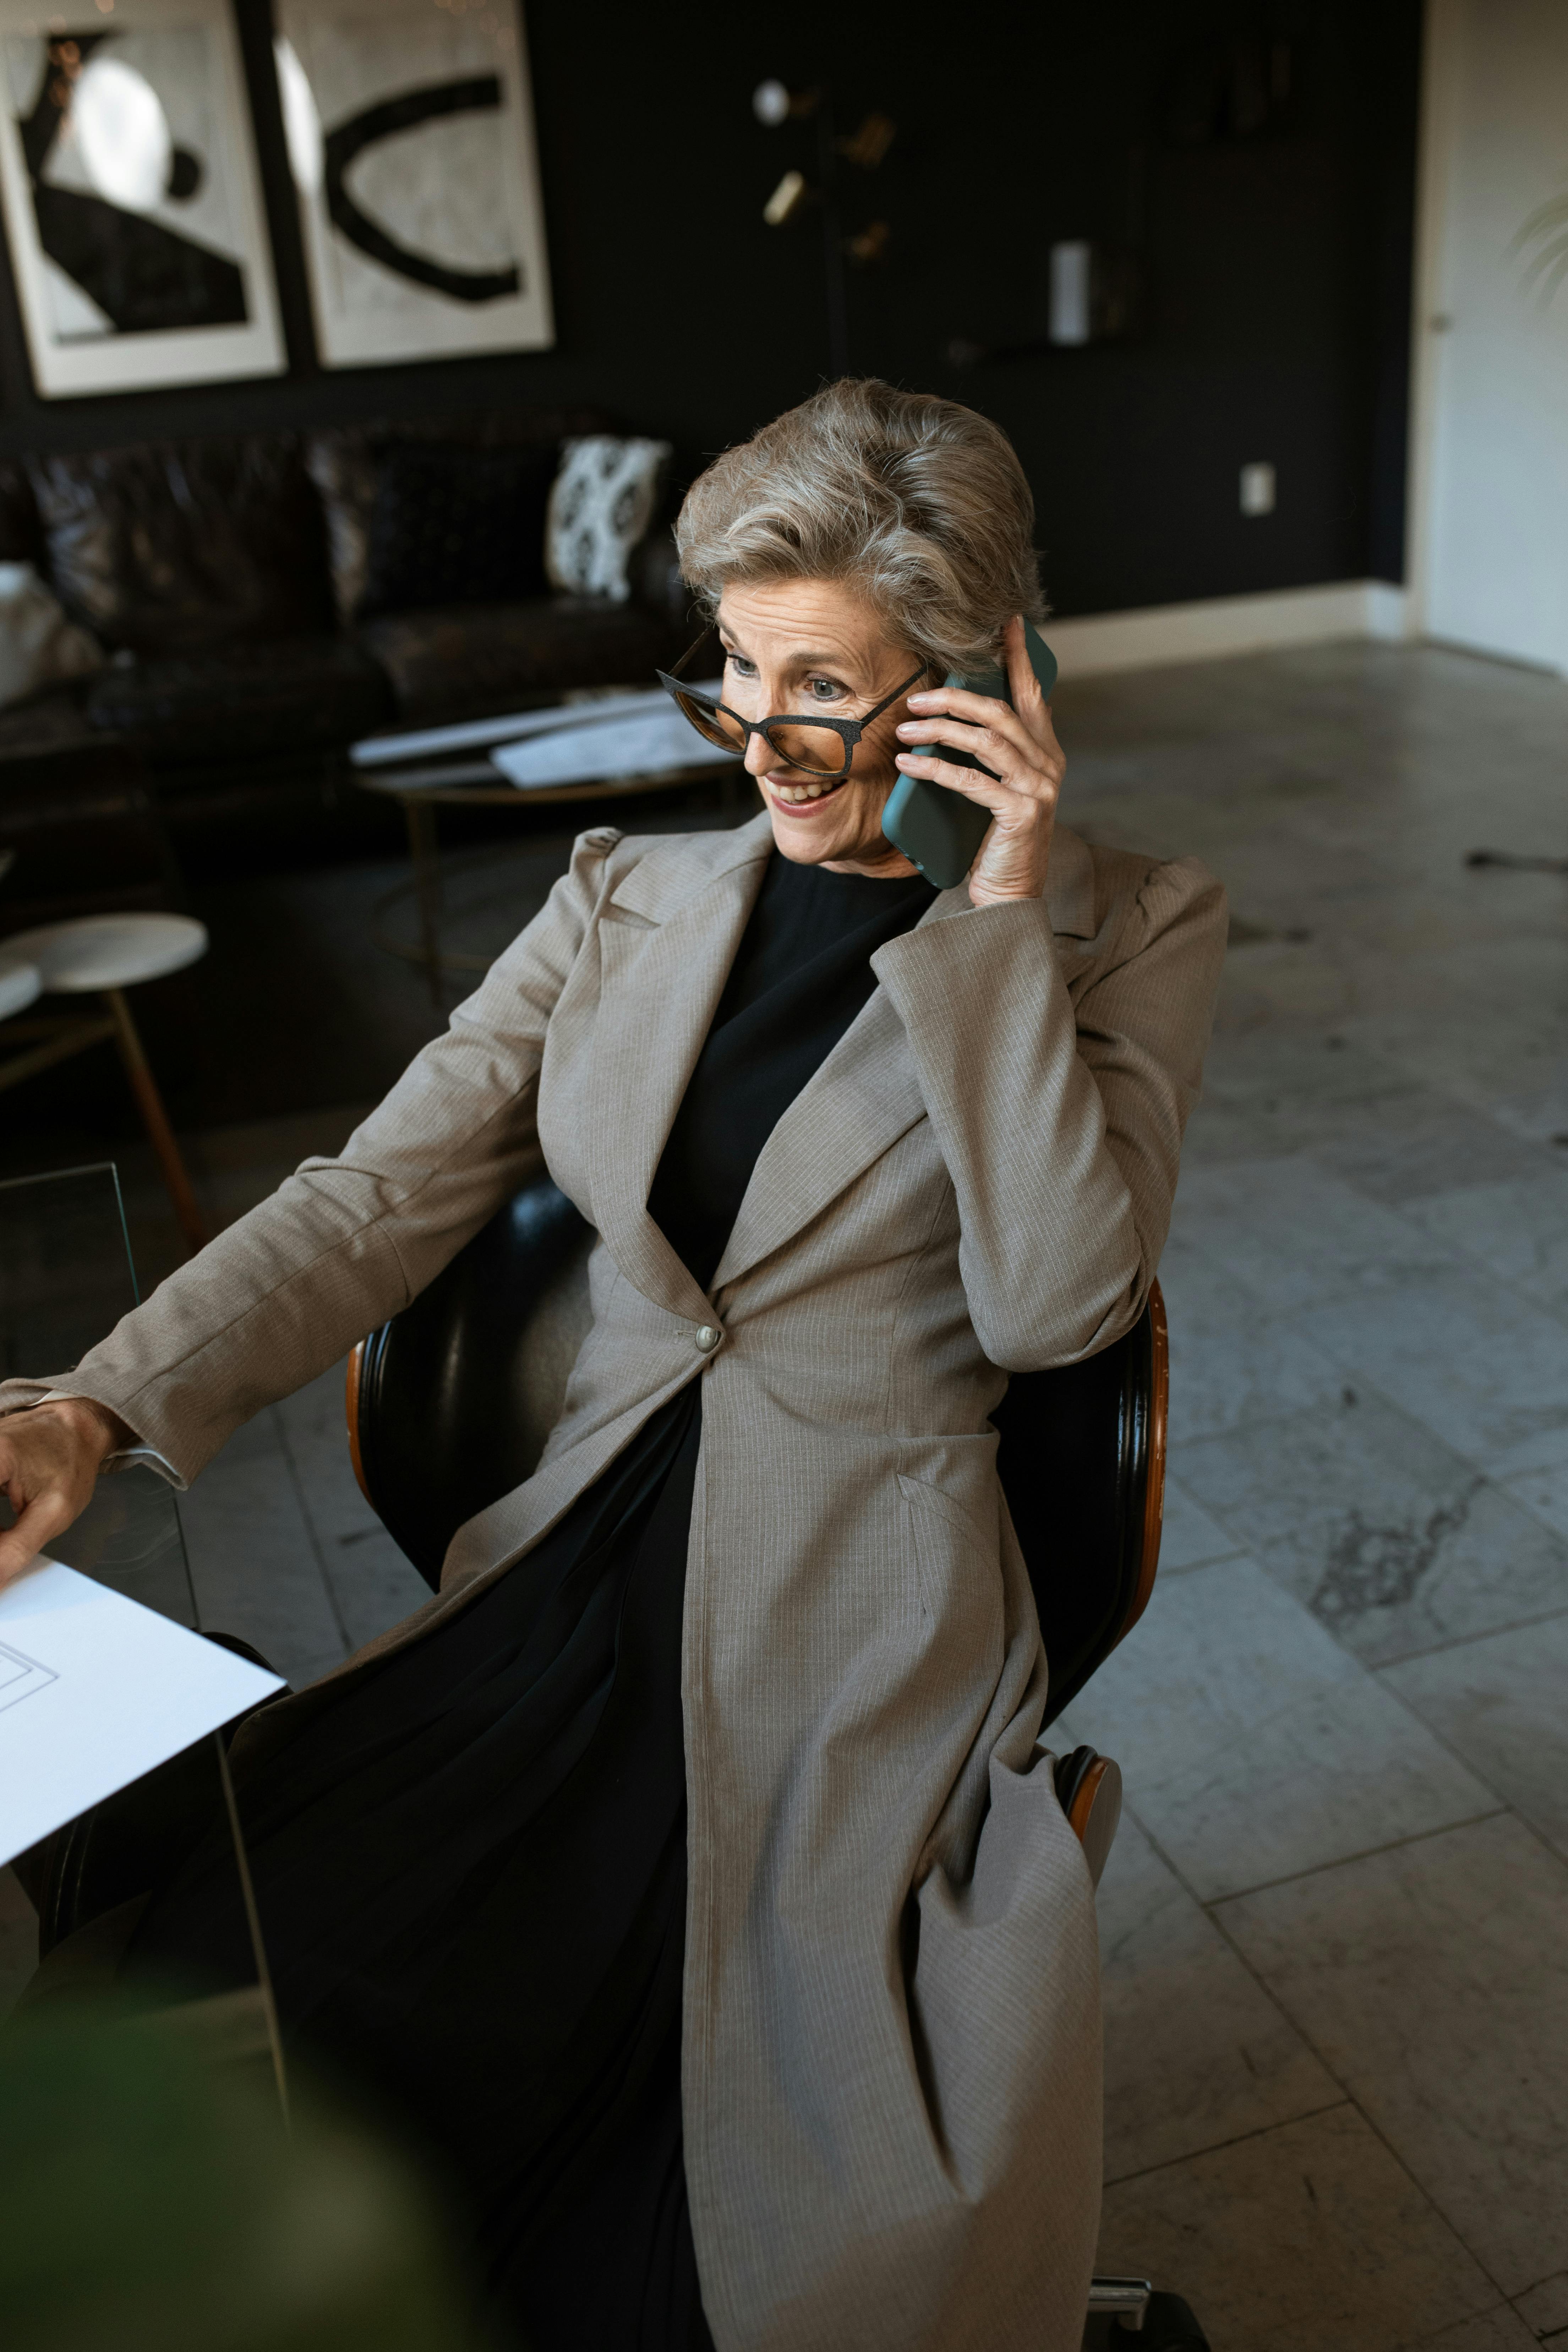 The woman excitedly talking on the phone | Source: Pexels